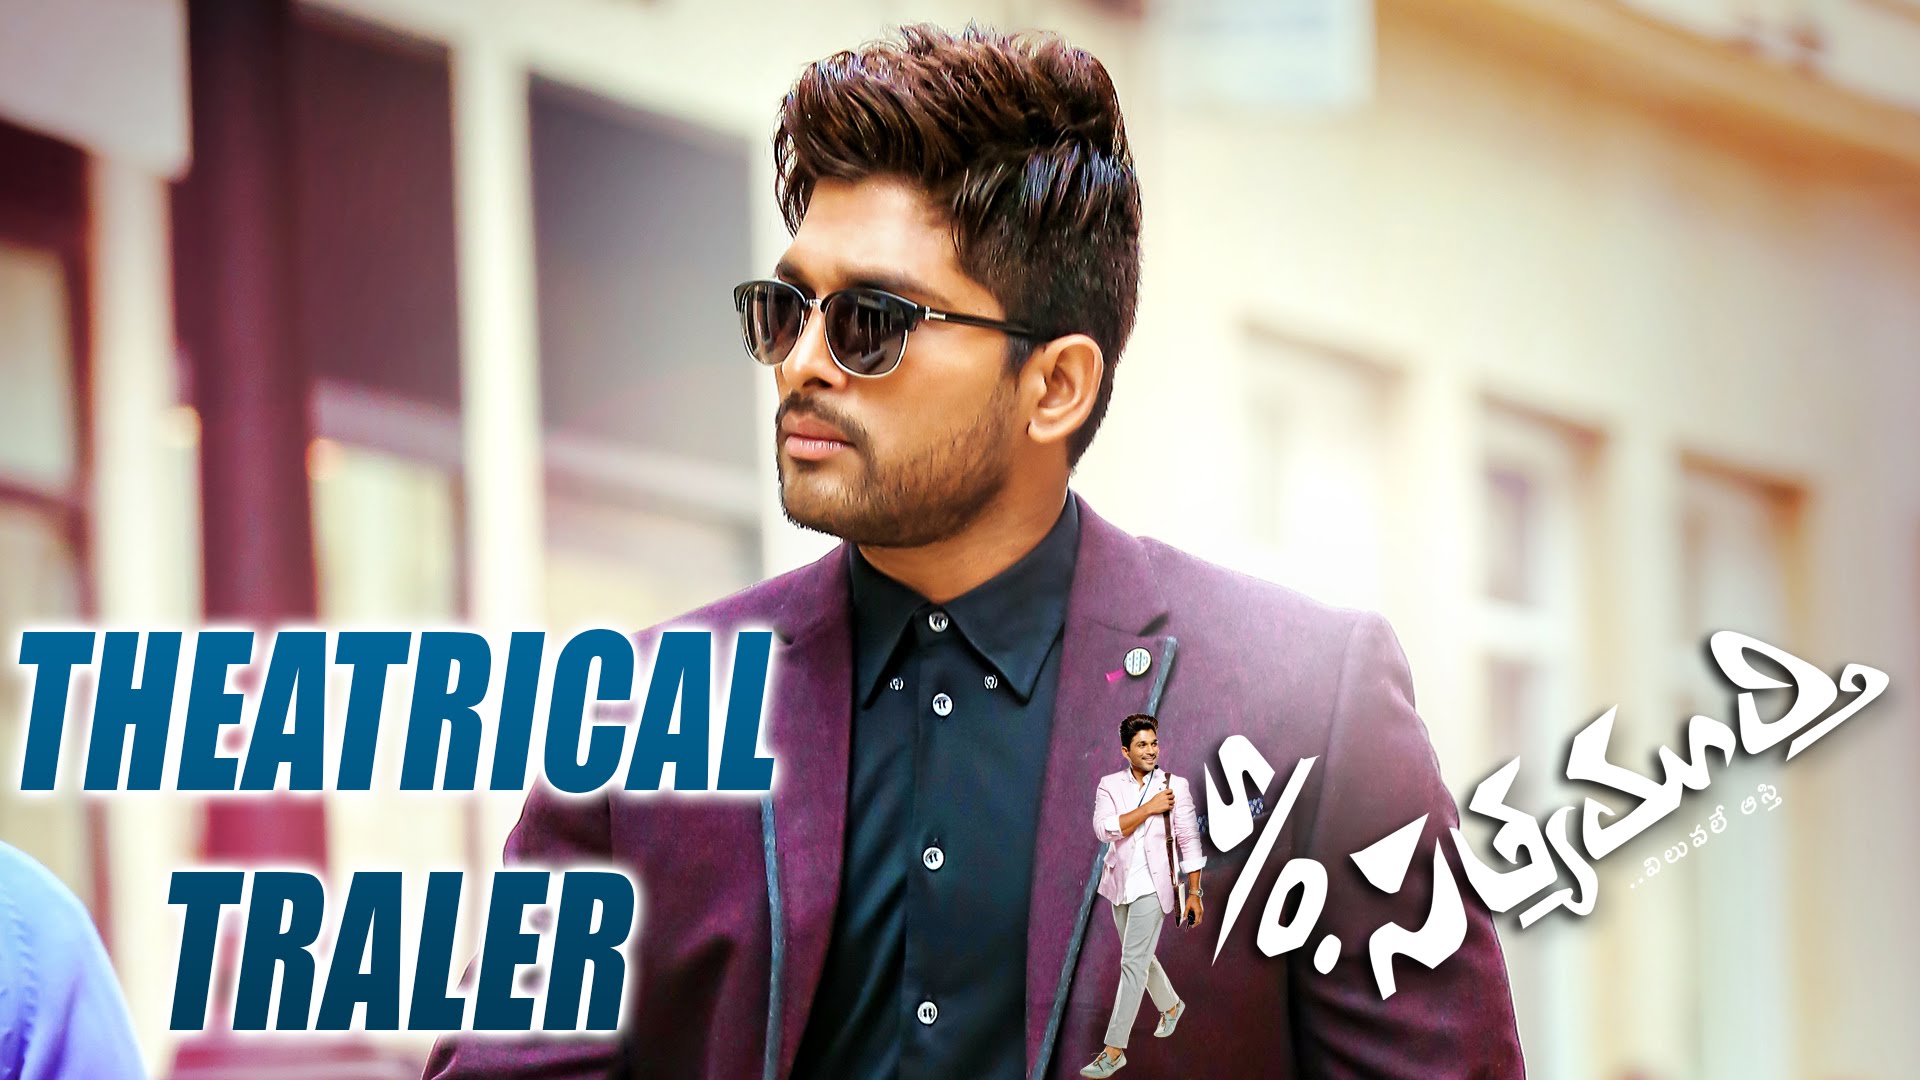 Share 77+ son of satyamurthy hairstyle images - in.eteachers